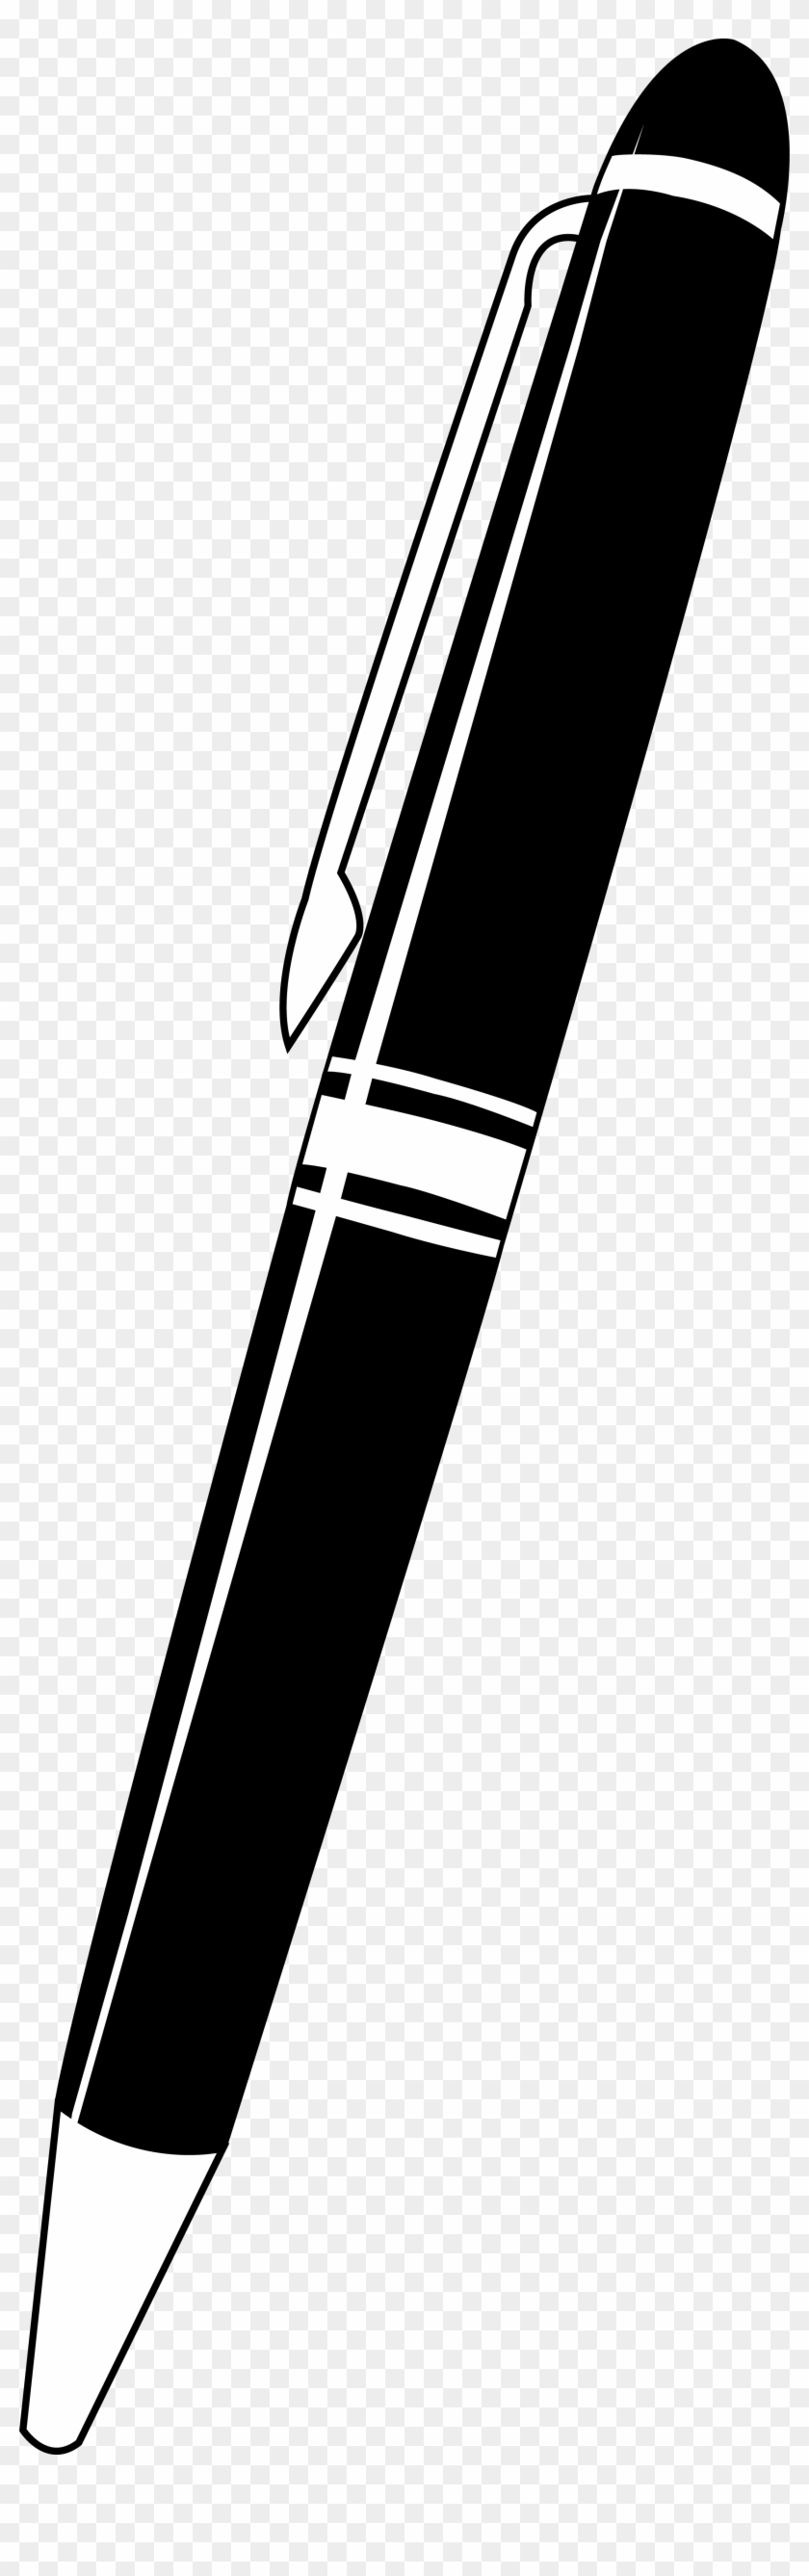 Free Pen And Ink Clipart - Black And White Pen - Png Download #2466983